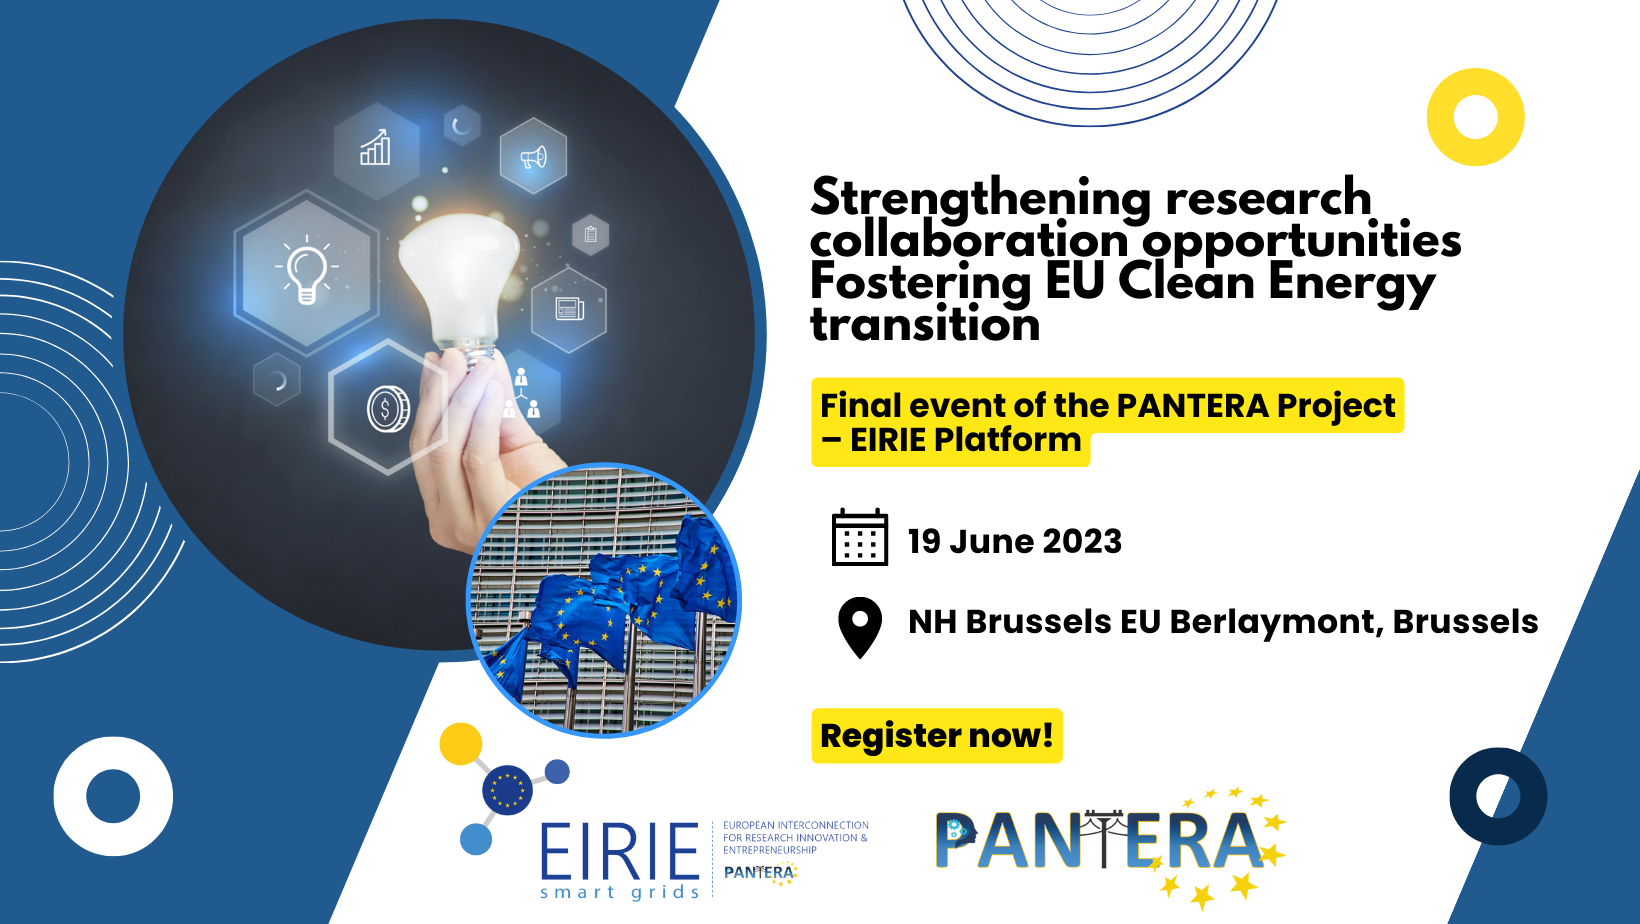 Strengthening research collaboration opportunities fostering the EU Clean Energy transition - Final event of H2020 PANTERA Project